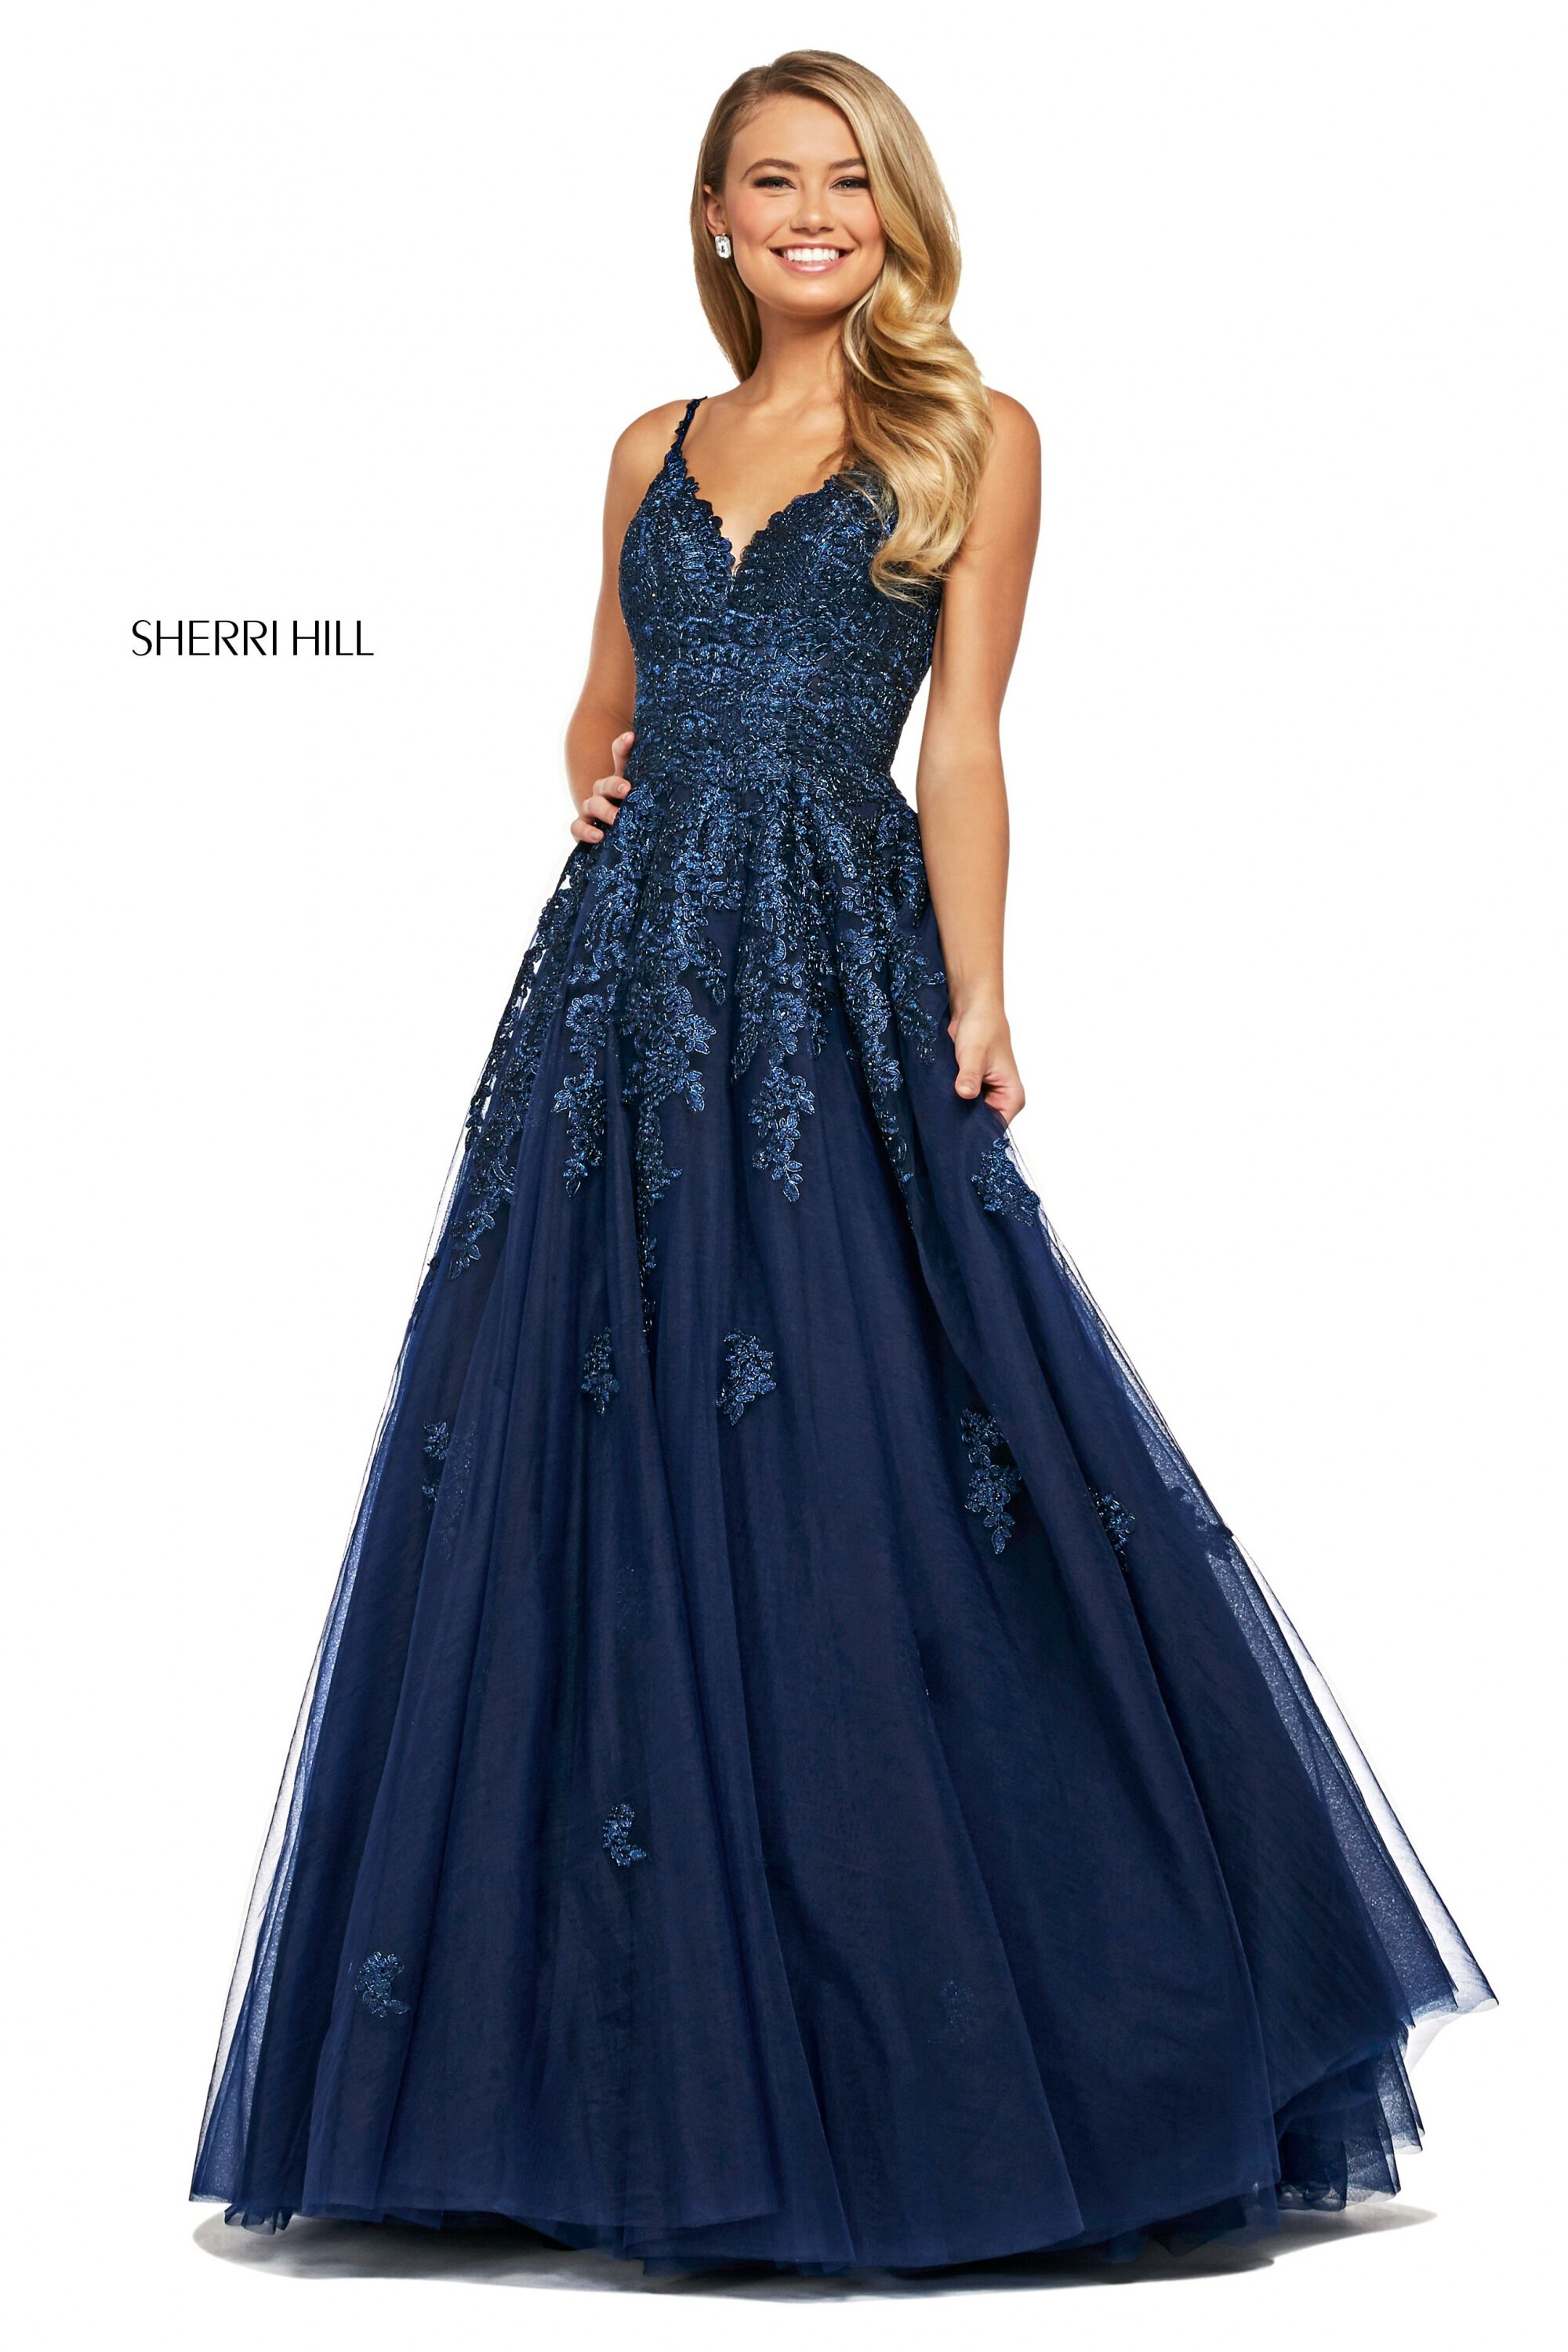 style № 53481 designed by SherriHill